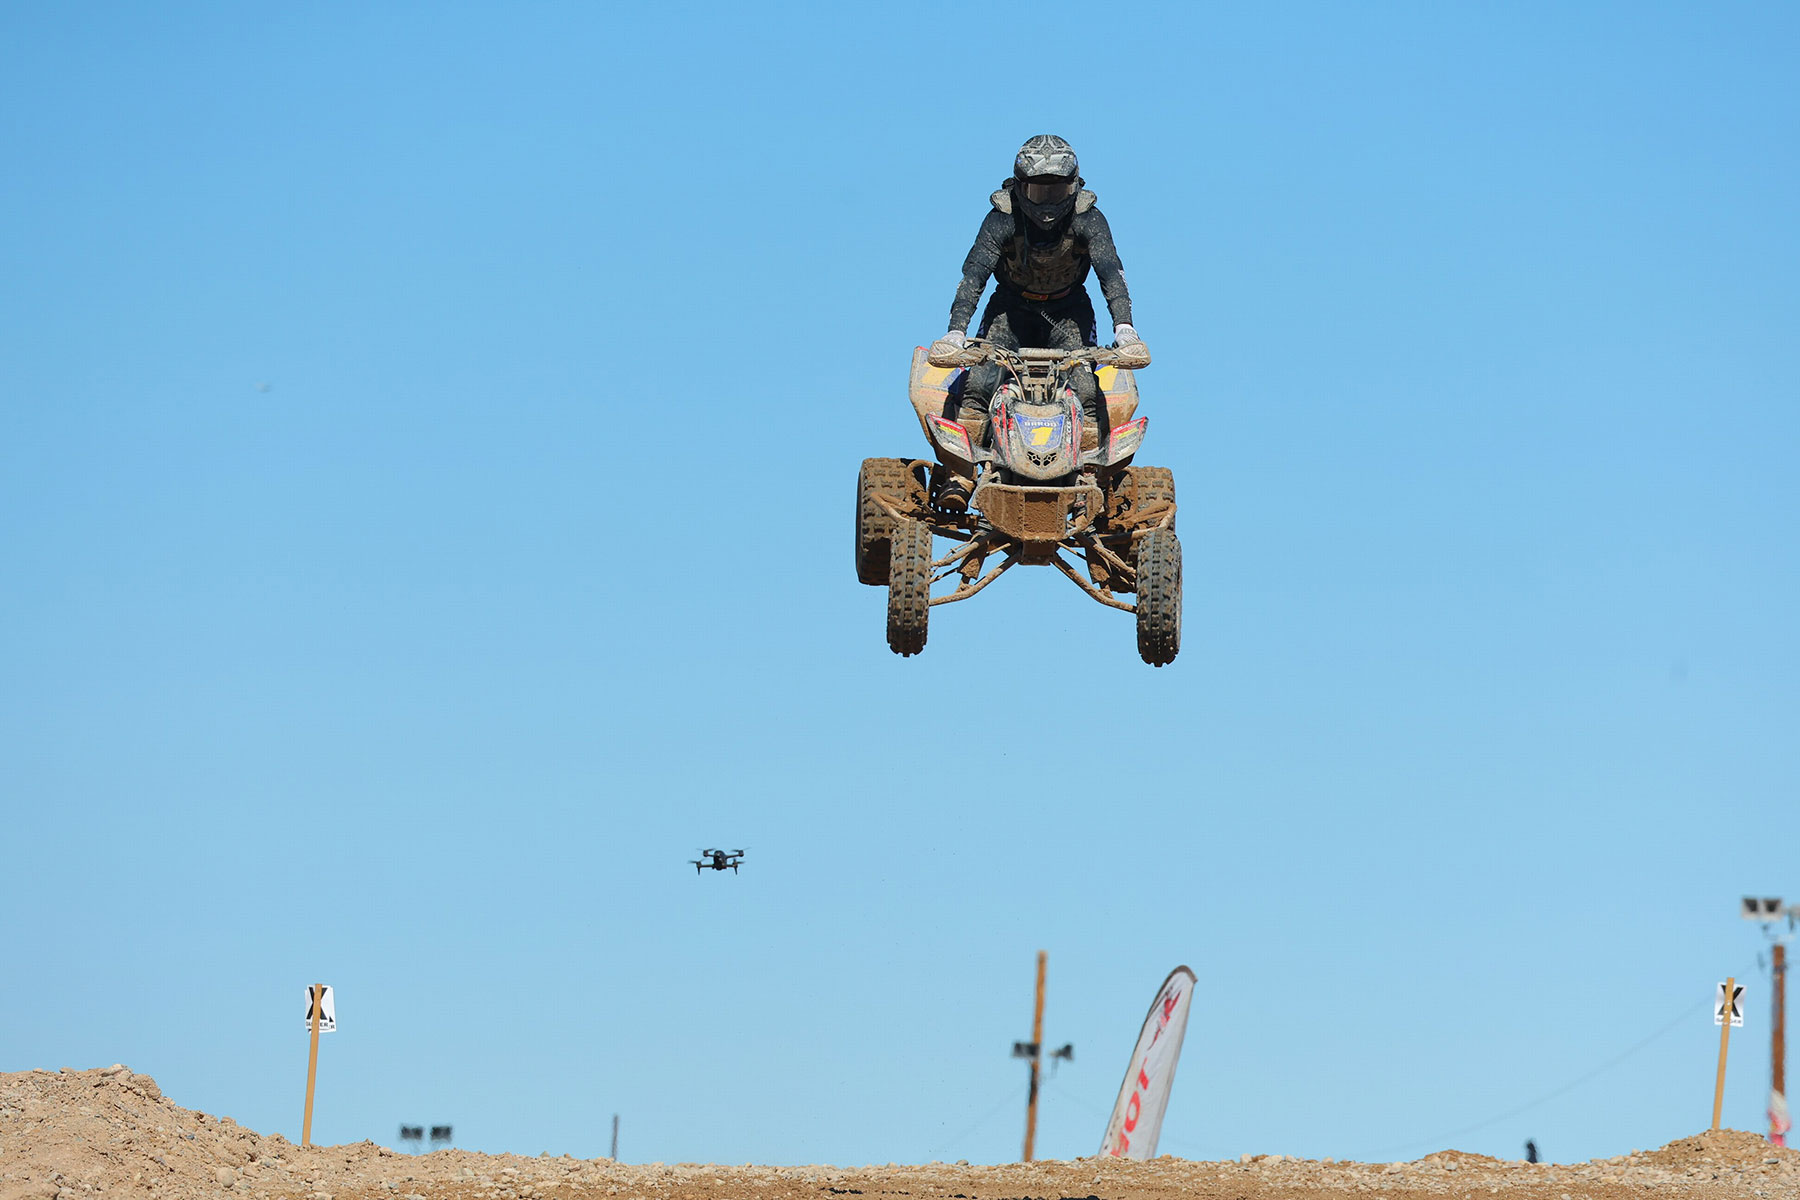 ATV racer in the air